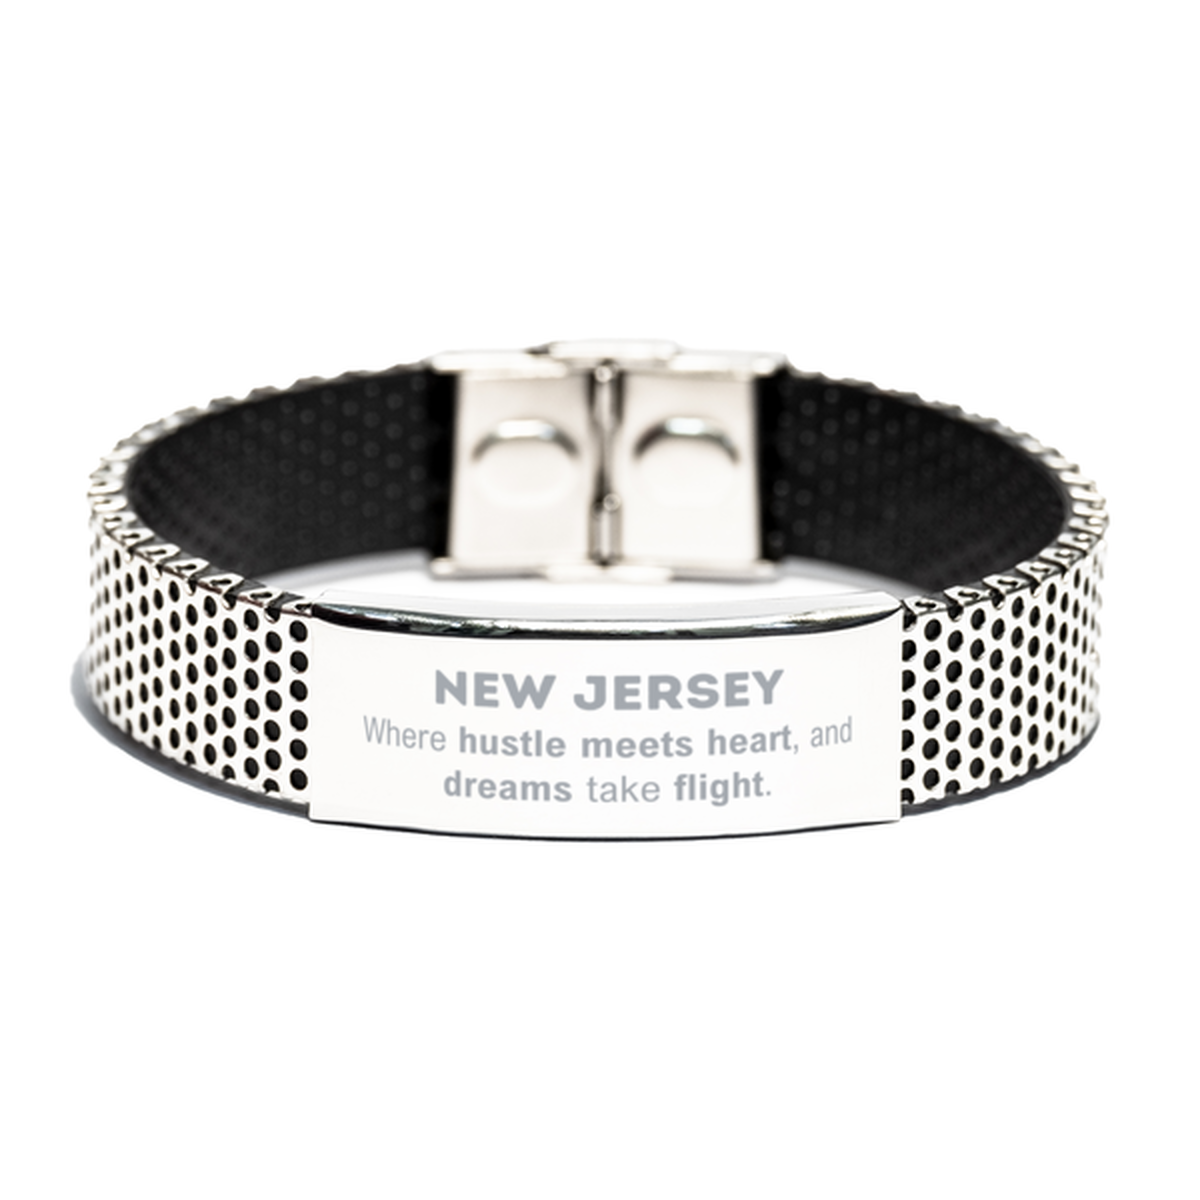 New Jersey: Where hustle meets heart, and dreams take flight, New Jersey Gifts, Proud New Jersey Christmas Birthday New Jersey Stainless Steel Bracelet, New Jersey State People, Men, Women, Friends